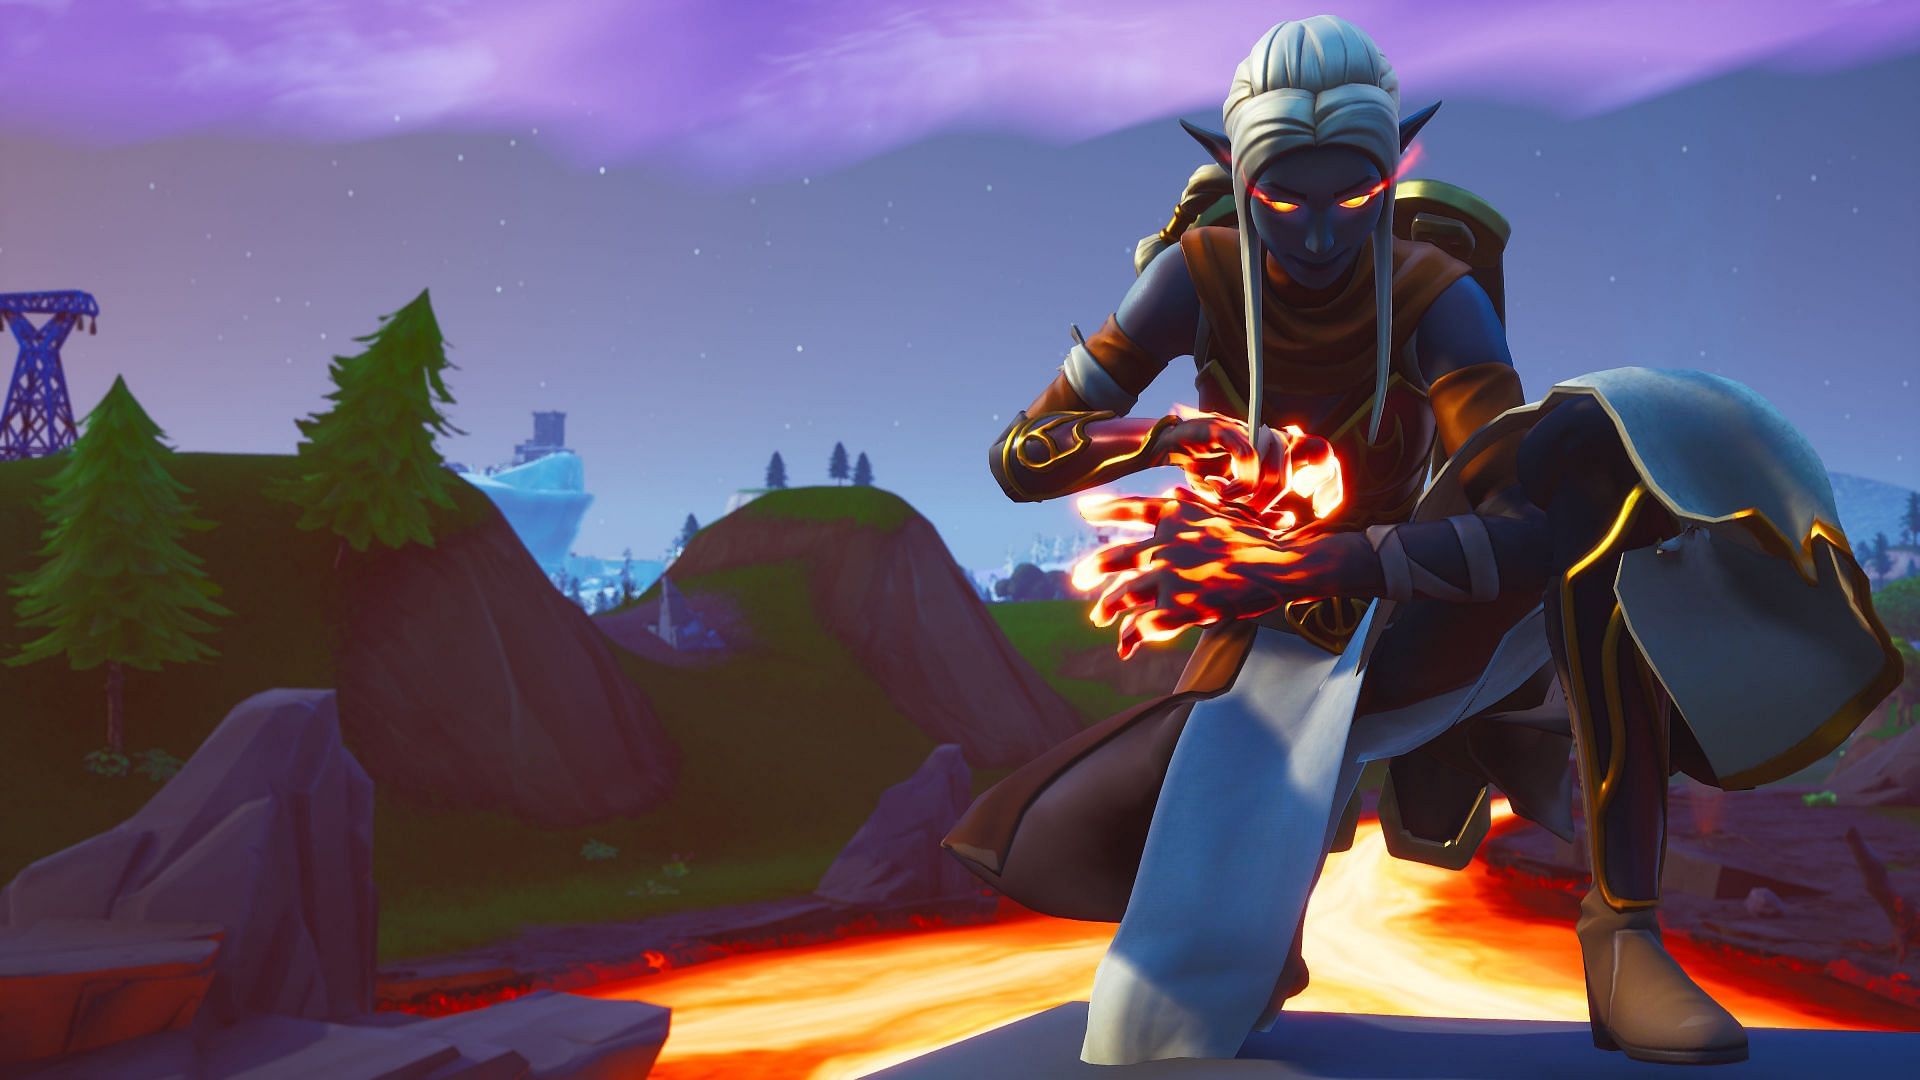 Ember is arriving on the Fortnite map and bringing a new questline. (Image via Epic Games)